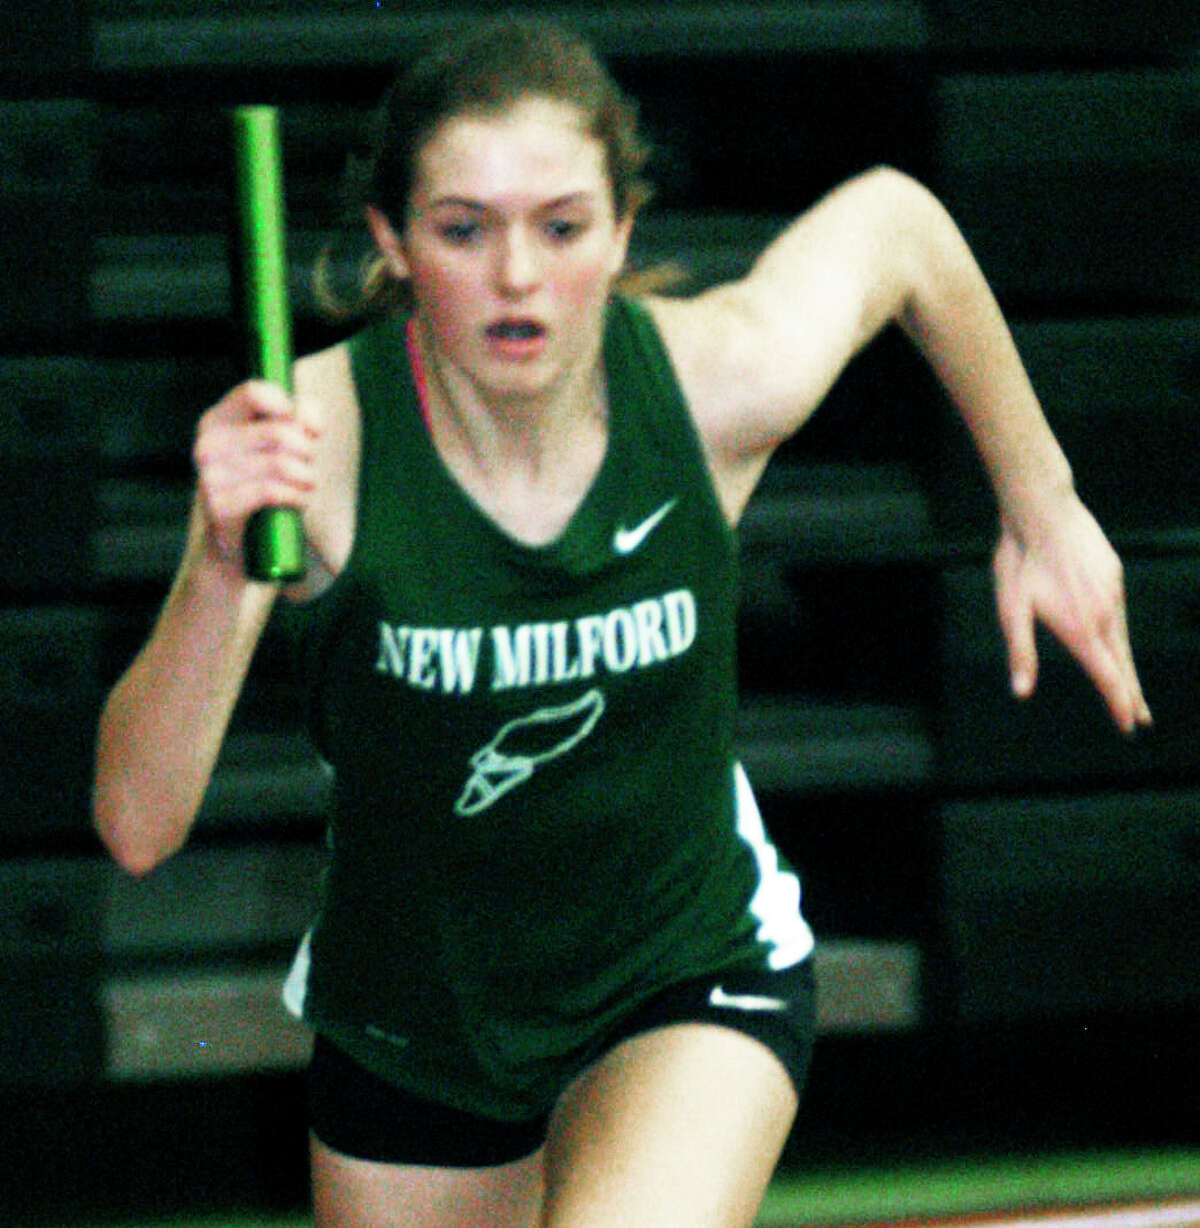 The Green Wave's Hannah Tower breaks quickly from the start to kick off the girls' victorious 4 x 400-meter relay run as New Milford High School indoor track competes Feb. 1, 2014 in the South-West Conference meet at Hillhouse High School in New Haven.